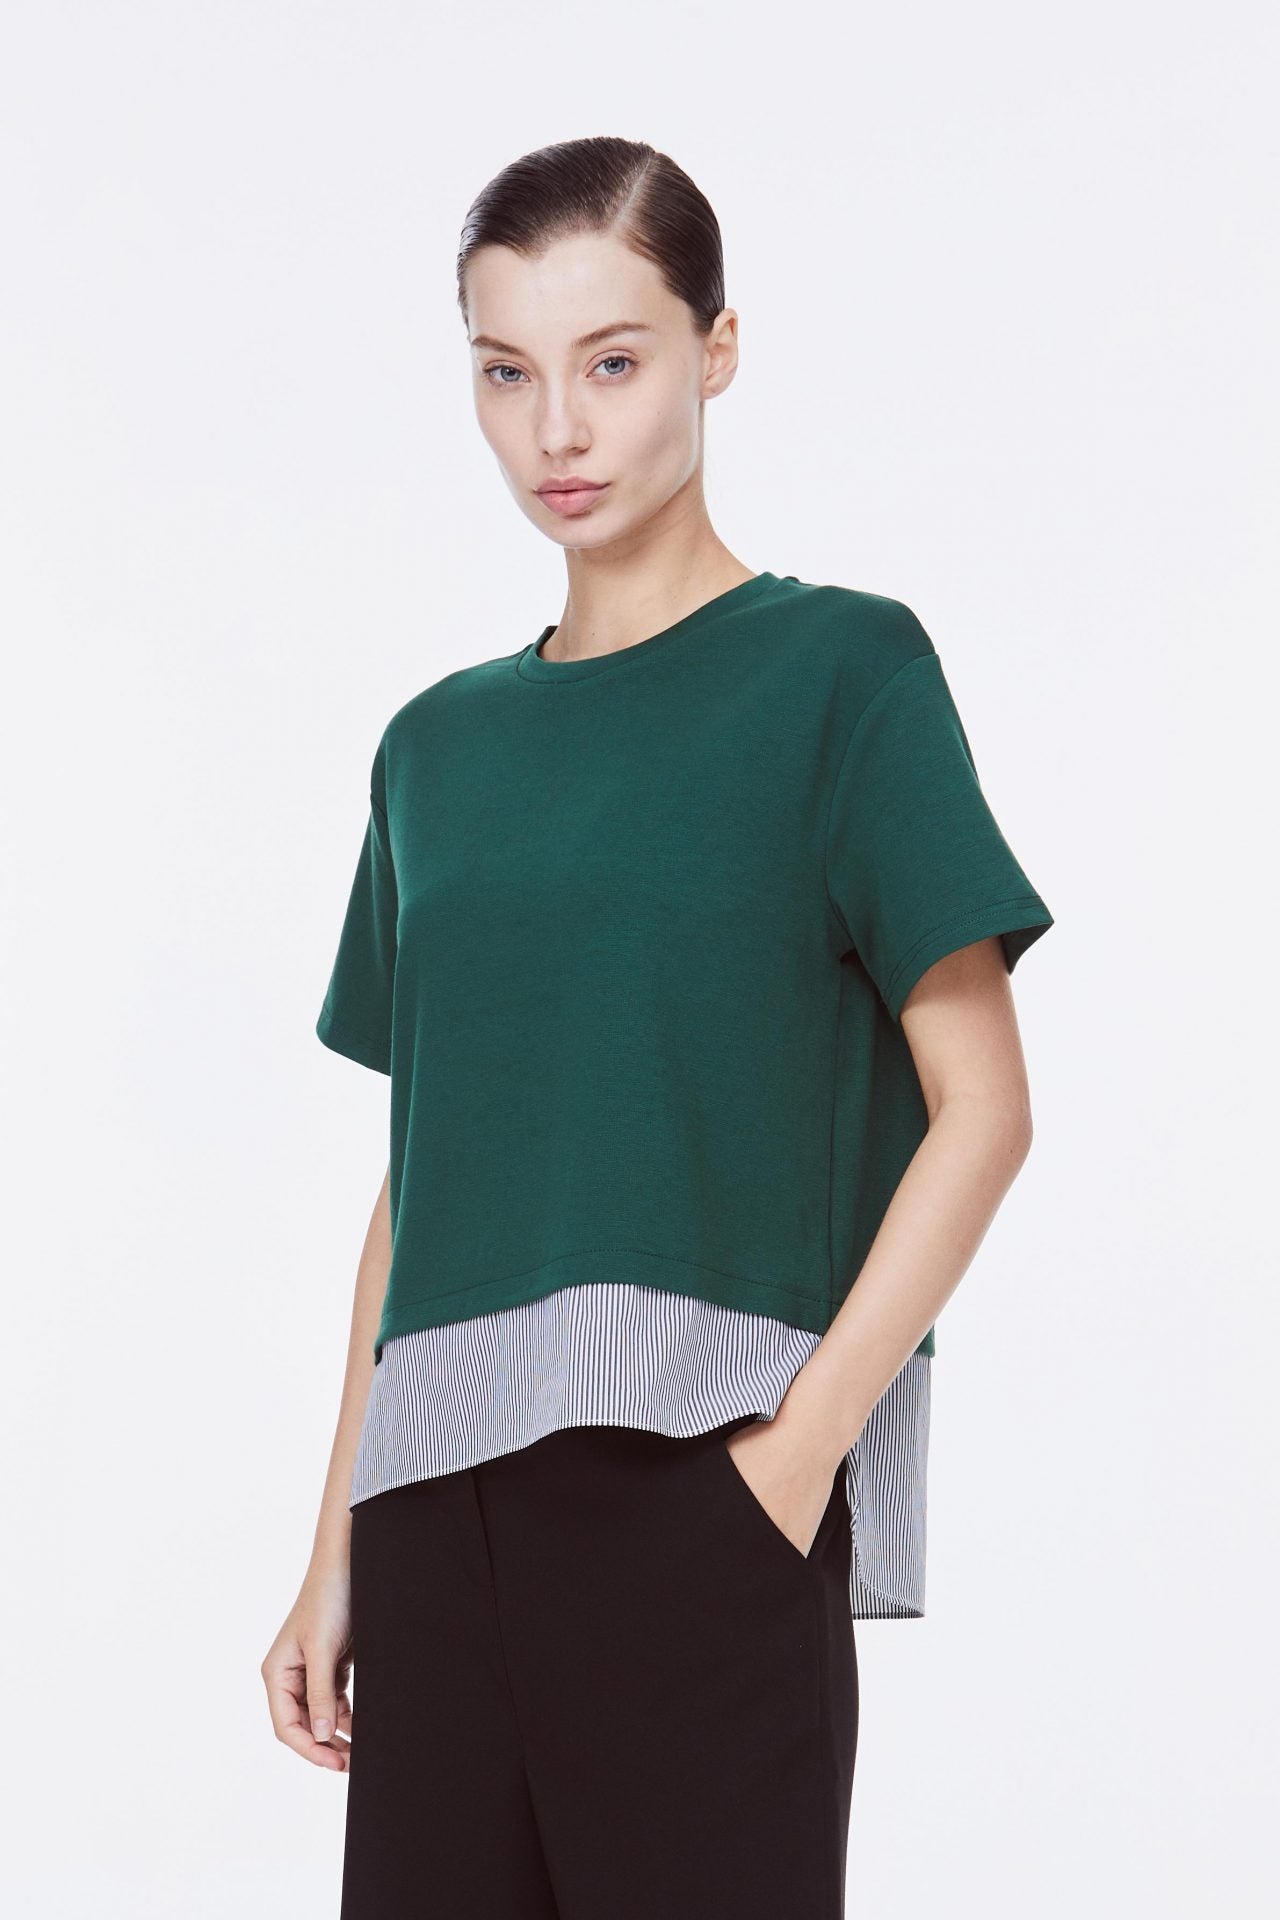 AT 7953 ROUND NECK TOP FOREST